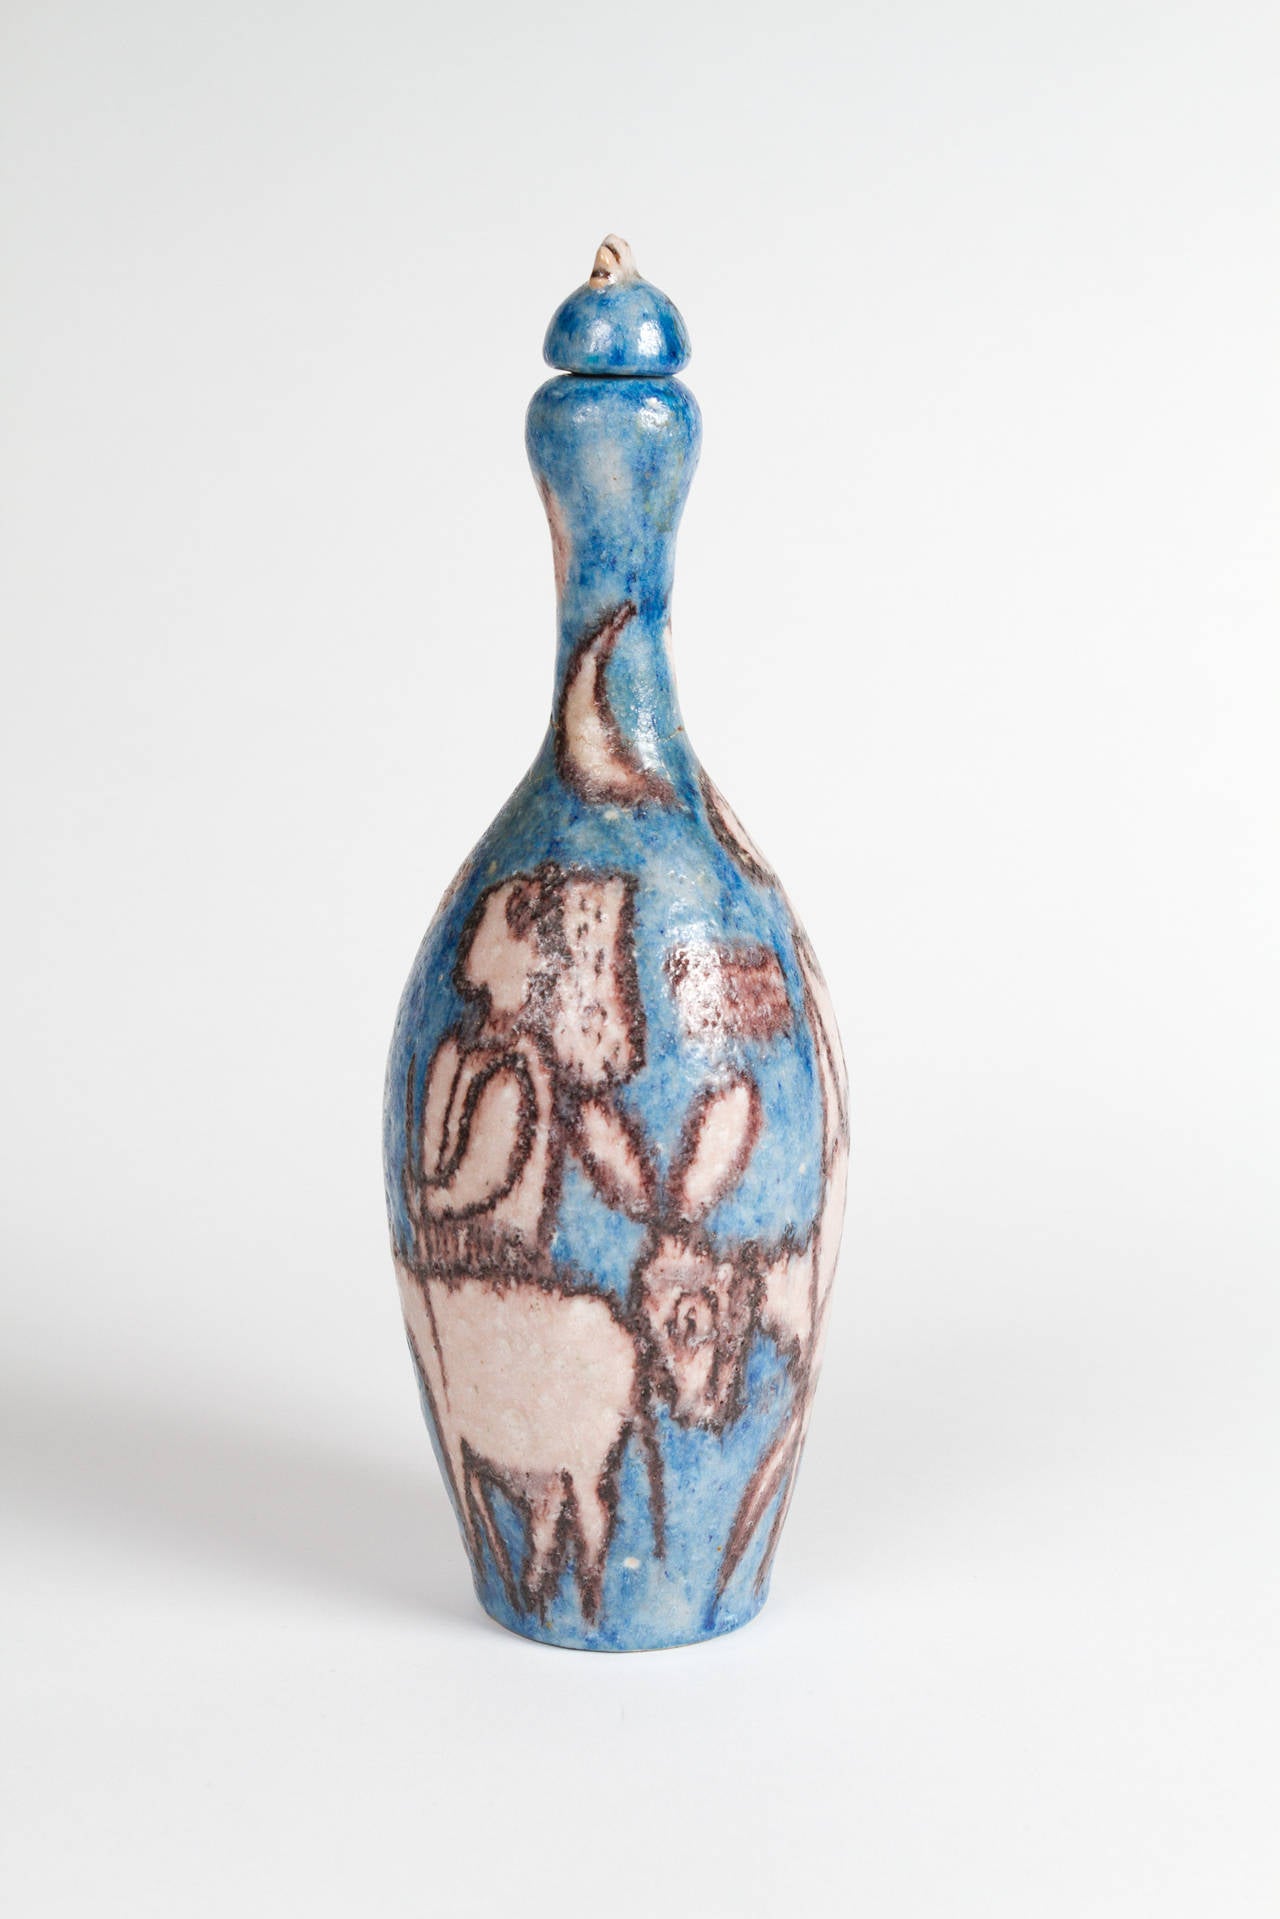 Whimsical Ceramic pitcher with lid depicting peasants with donkeys.